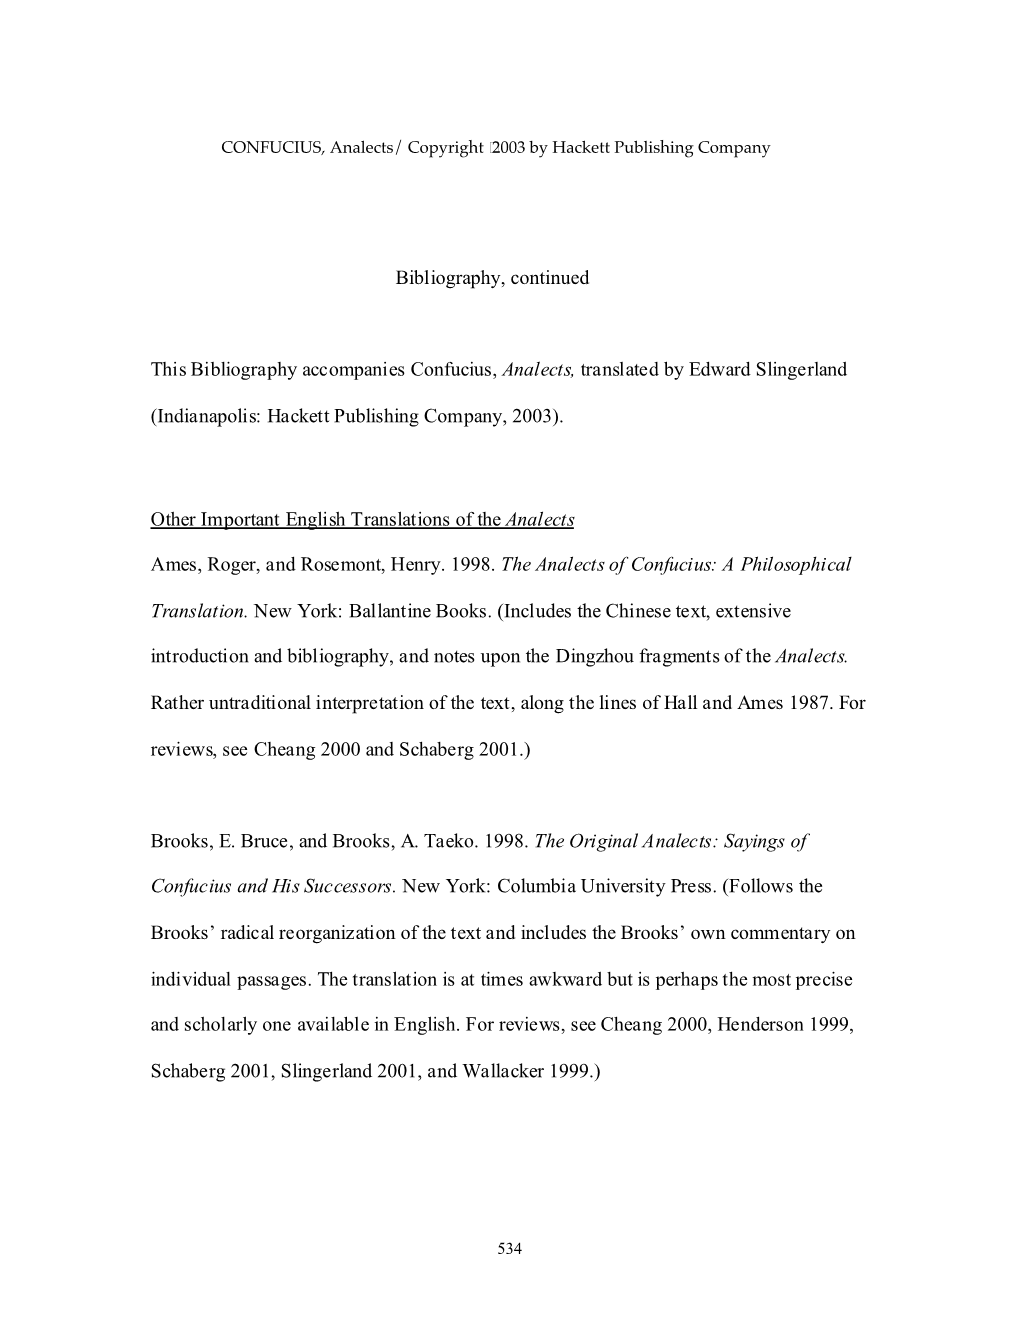 Analects Bibliography-Other